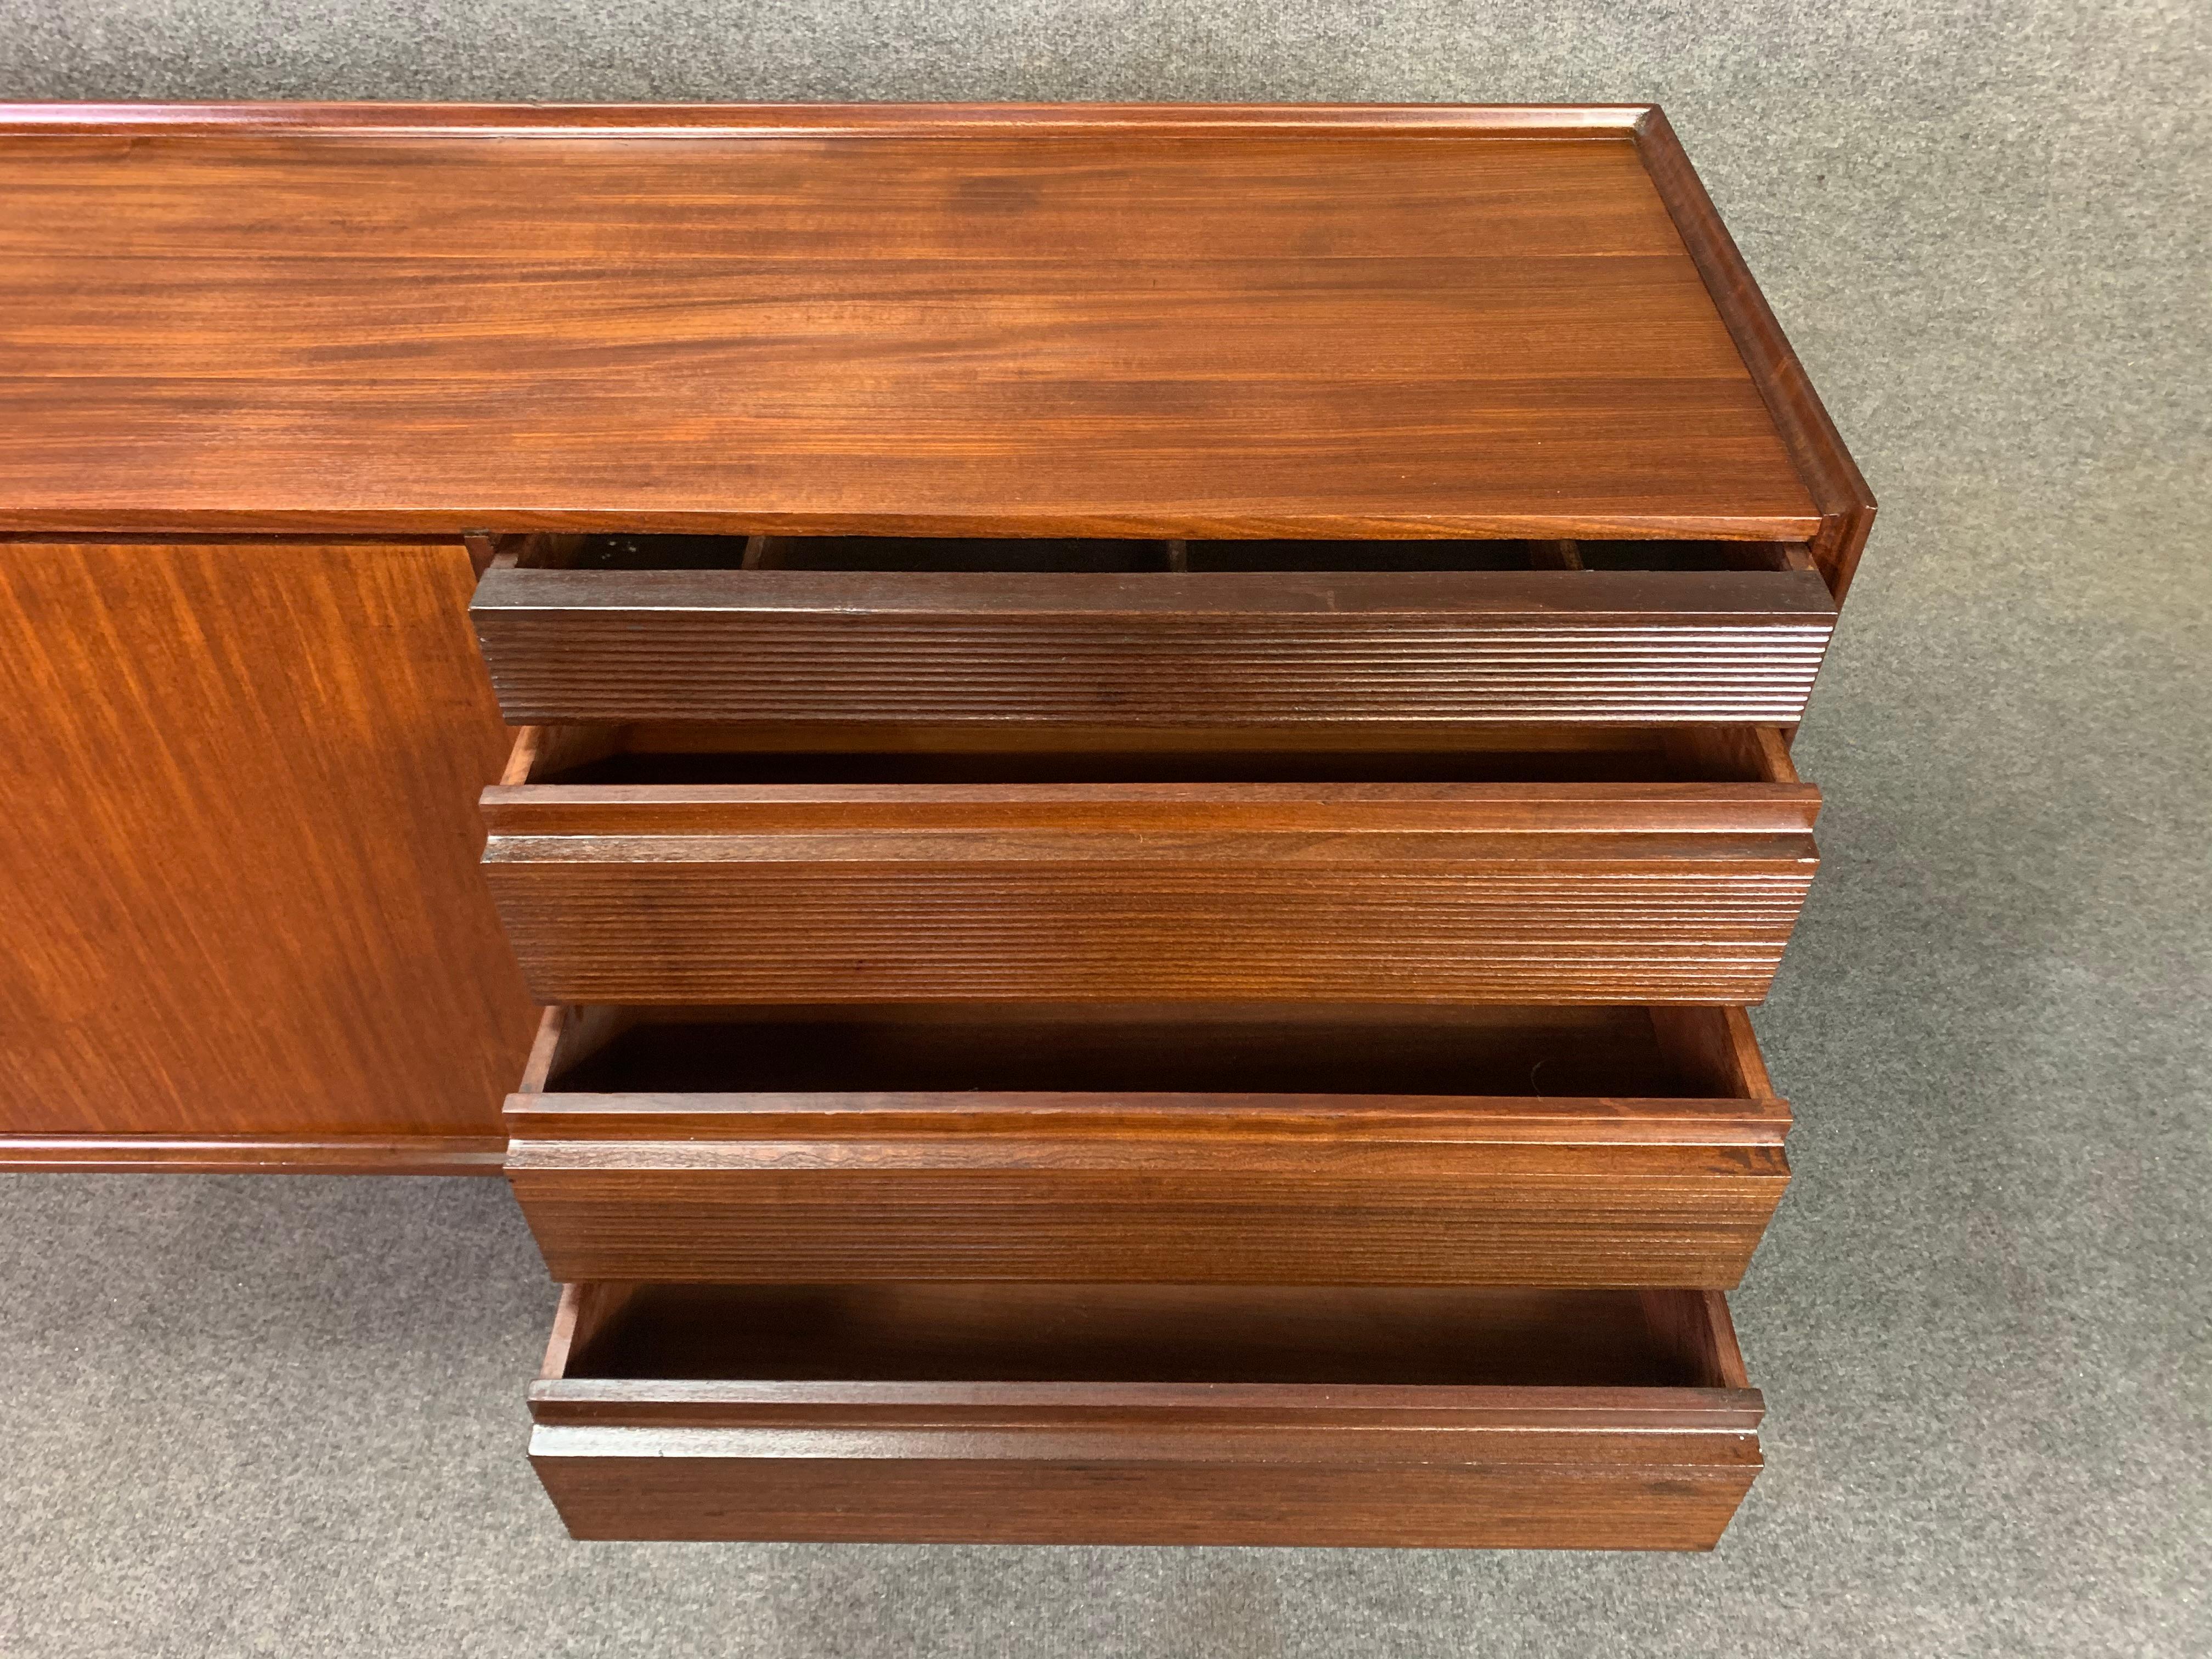 Vintage British Mid-Century Modern Afromasia Teak Credenza by Richard Hornby In Good Condition For Sale In San Marcos, CA